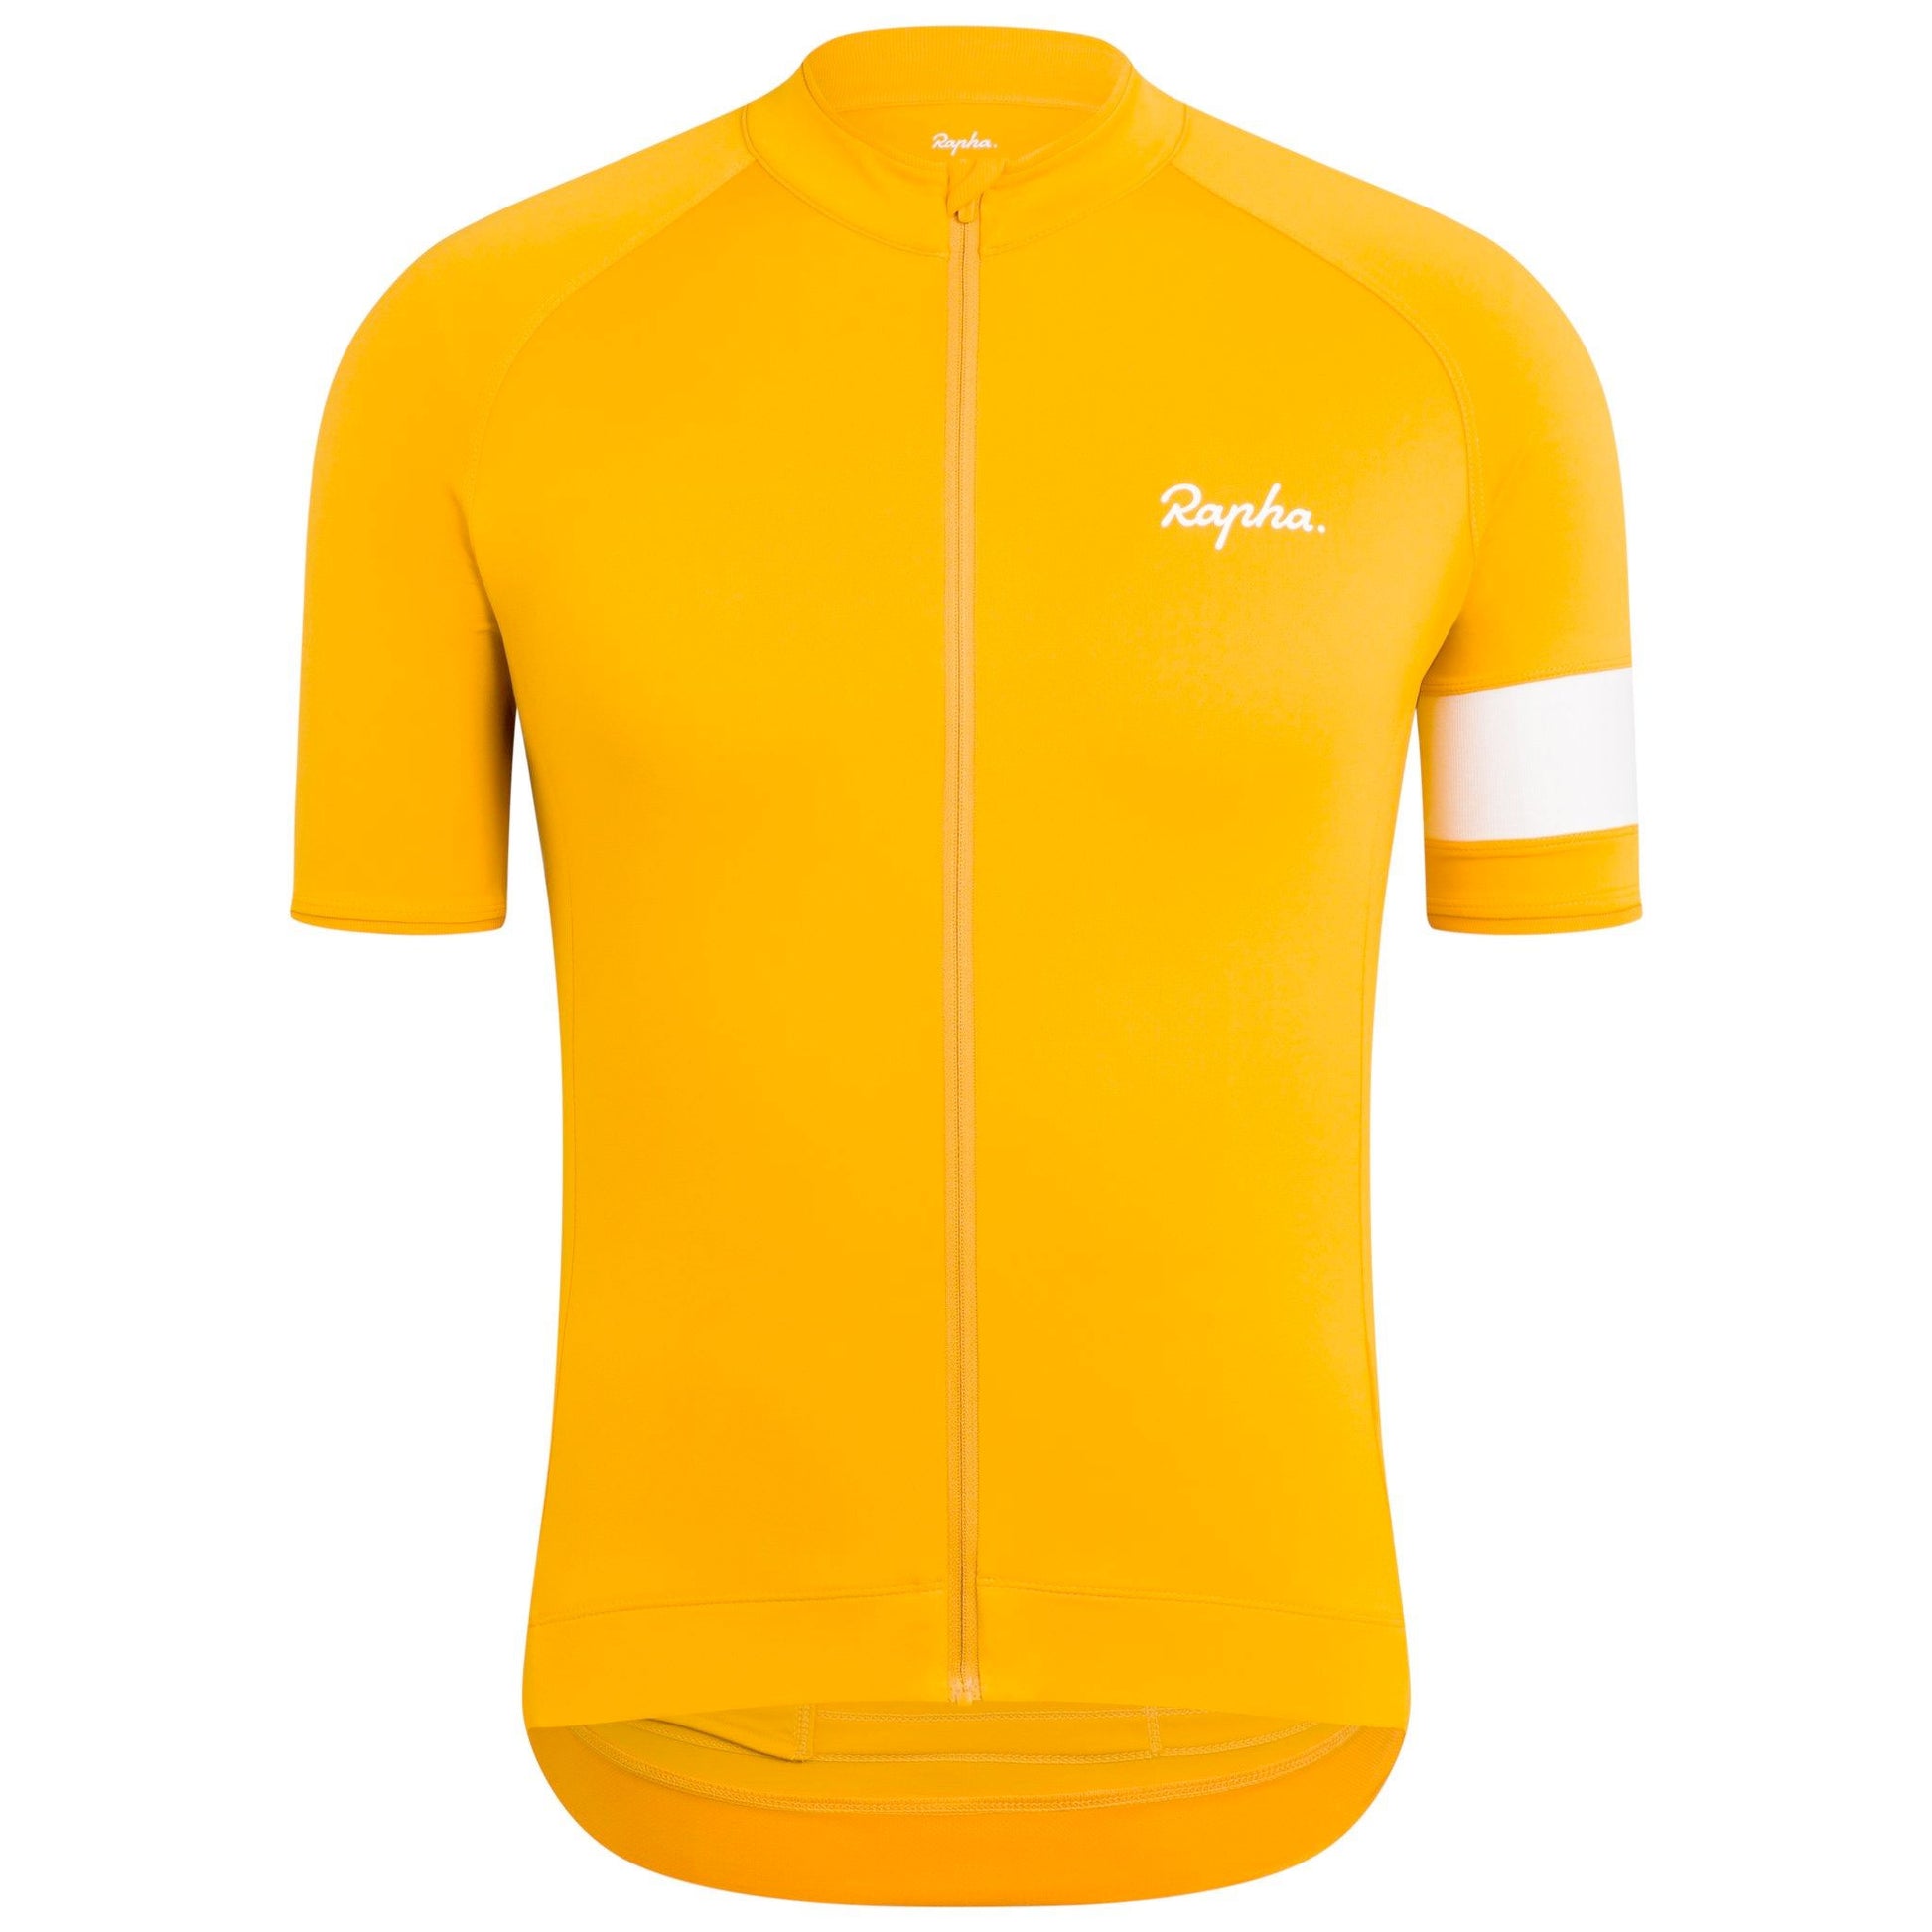 Rapha Mens Core Jersey, Yellow buy online at Woolys Wheels and receive free delivery